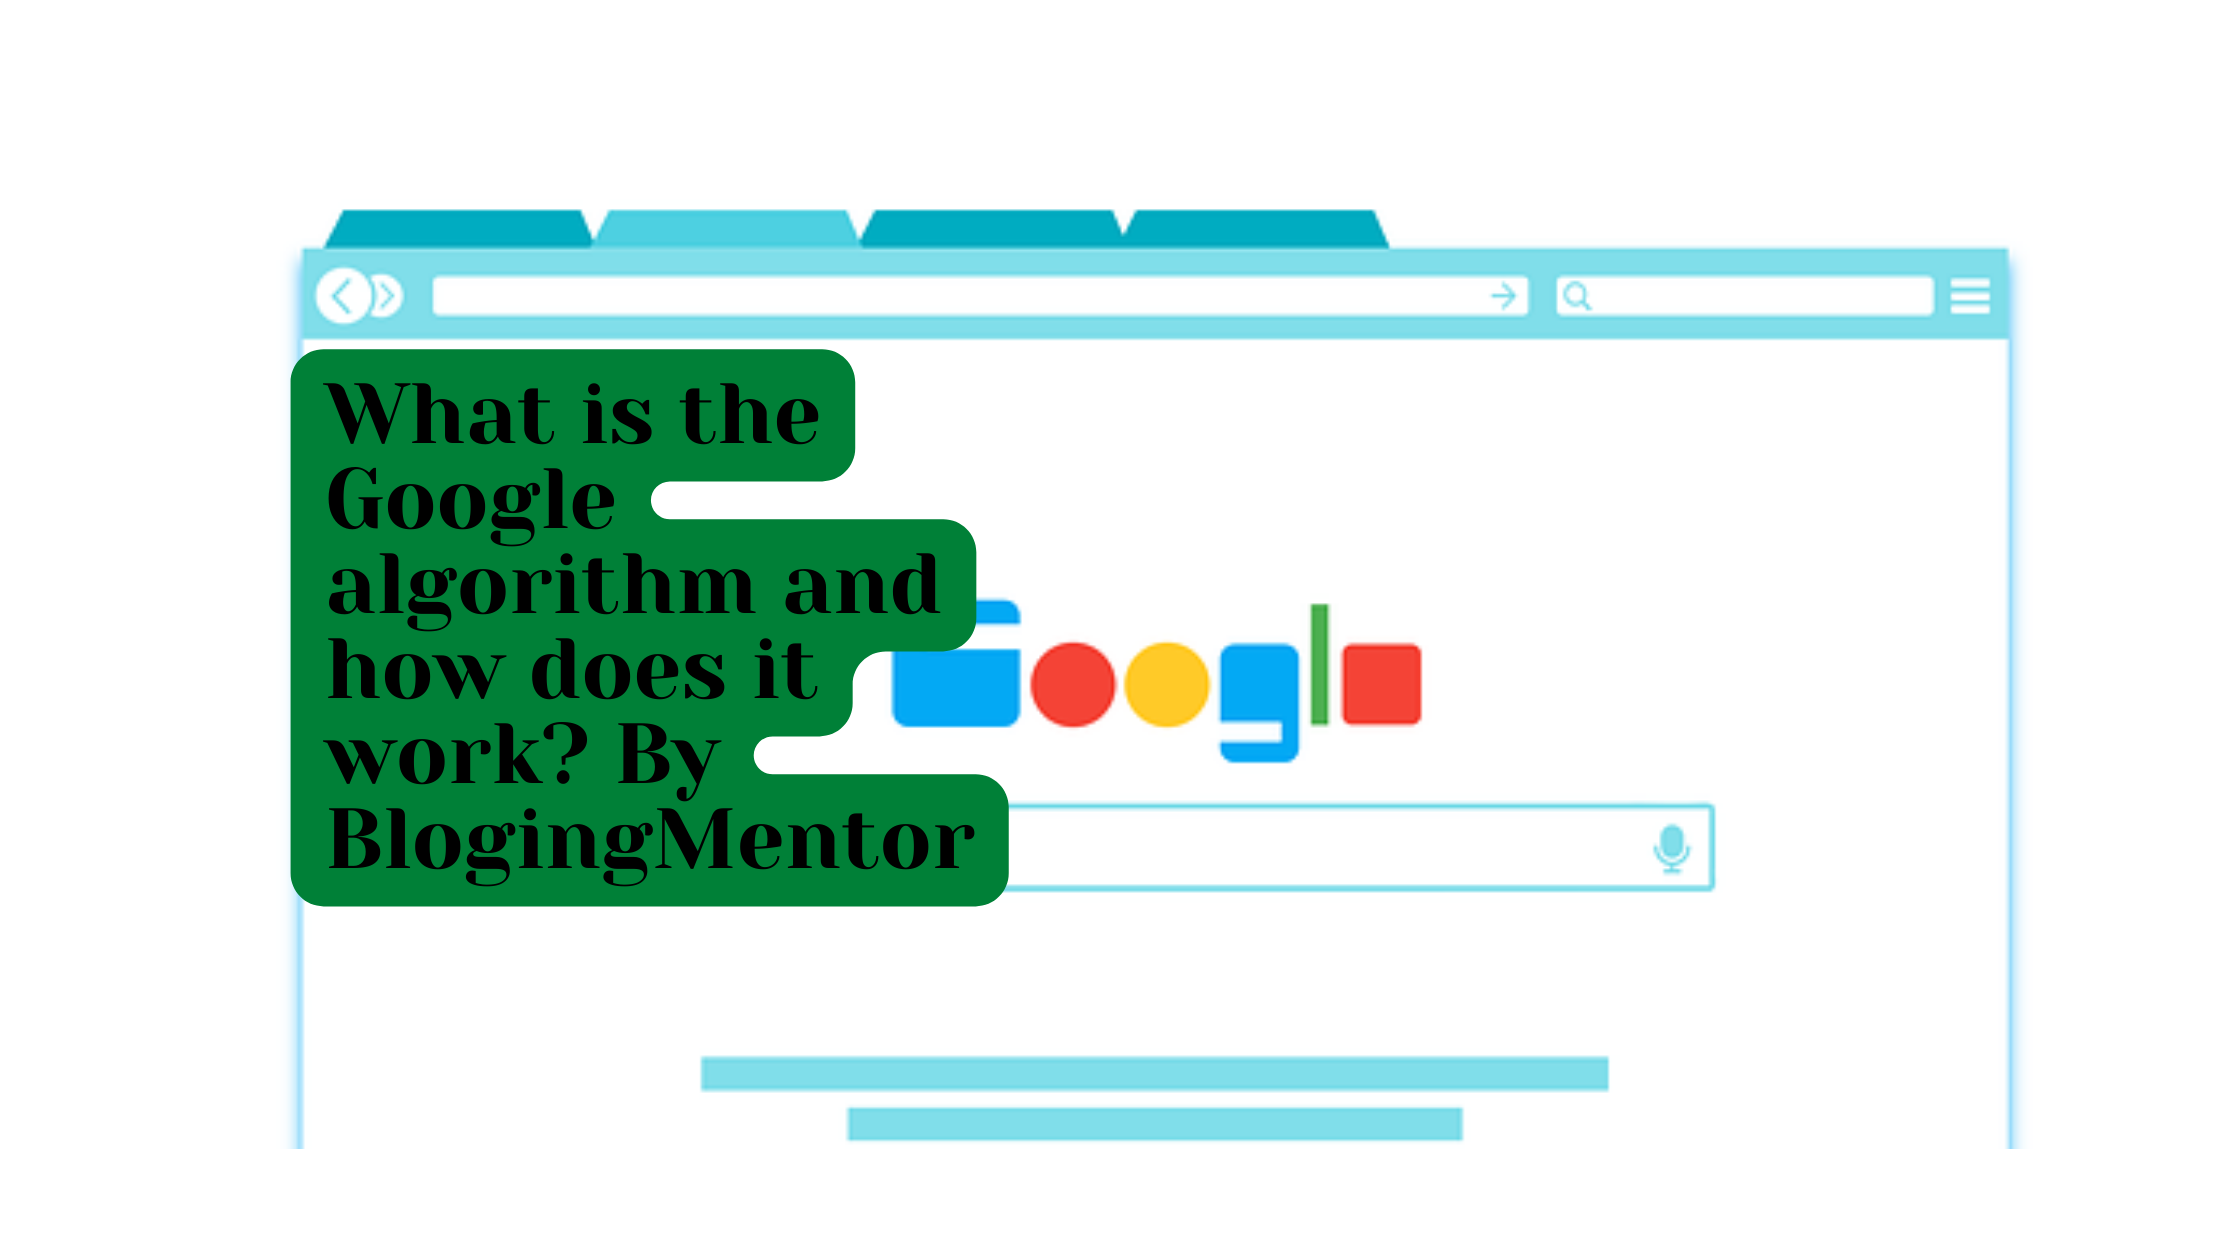 What is the Google algorithm and how does it work? By BlogingMentor